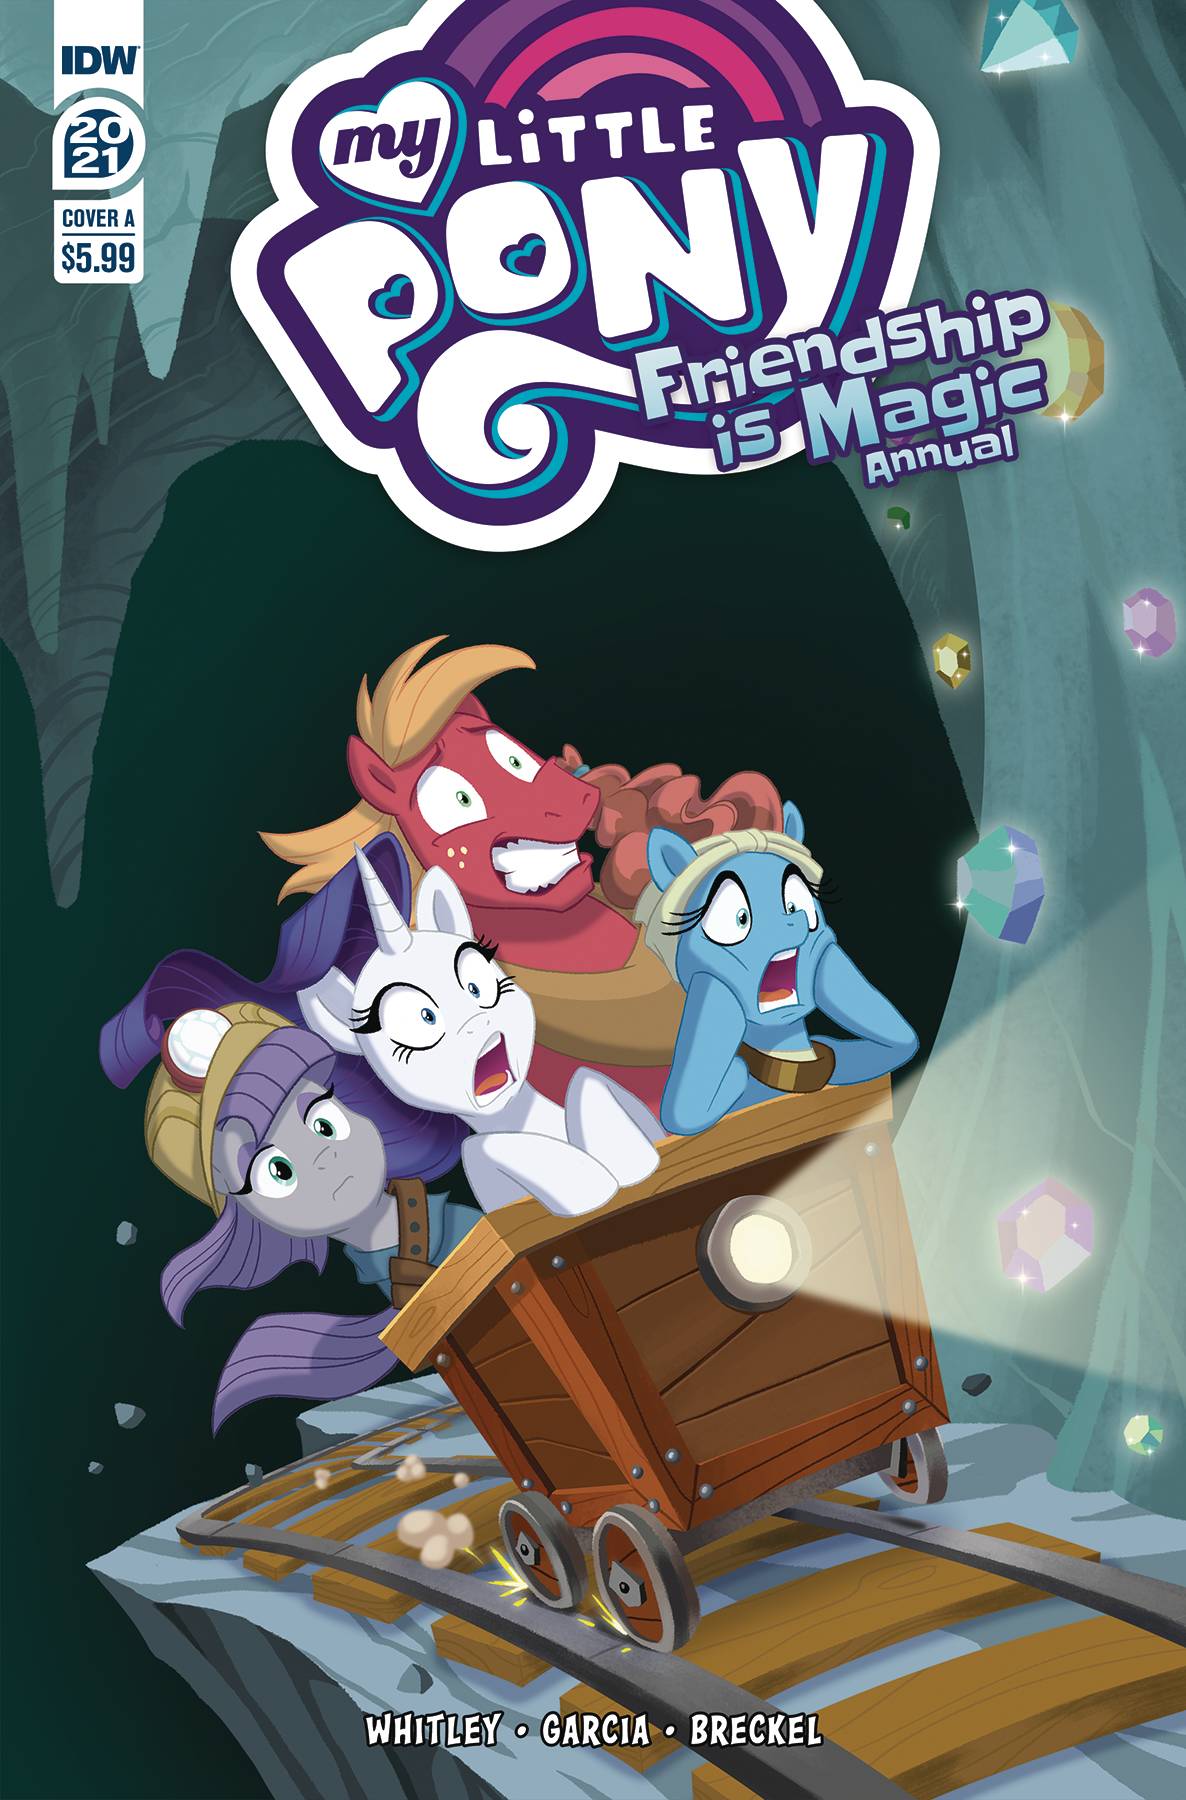 MY LITTLE PONY FRIENDSHIP IS MAGIC 2021 ANNUAL